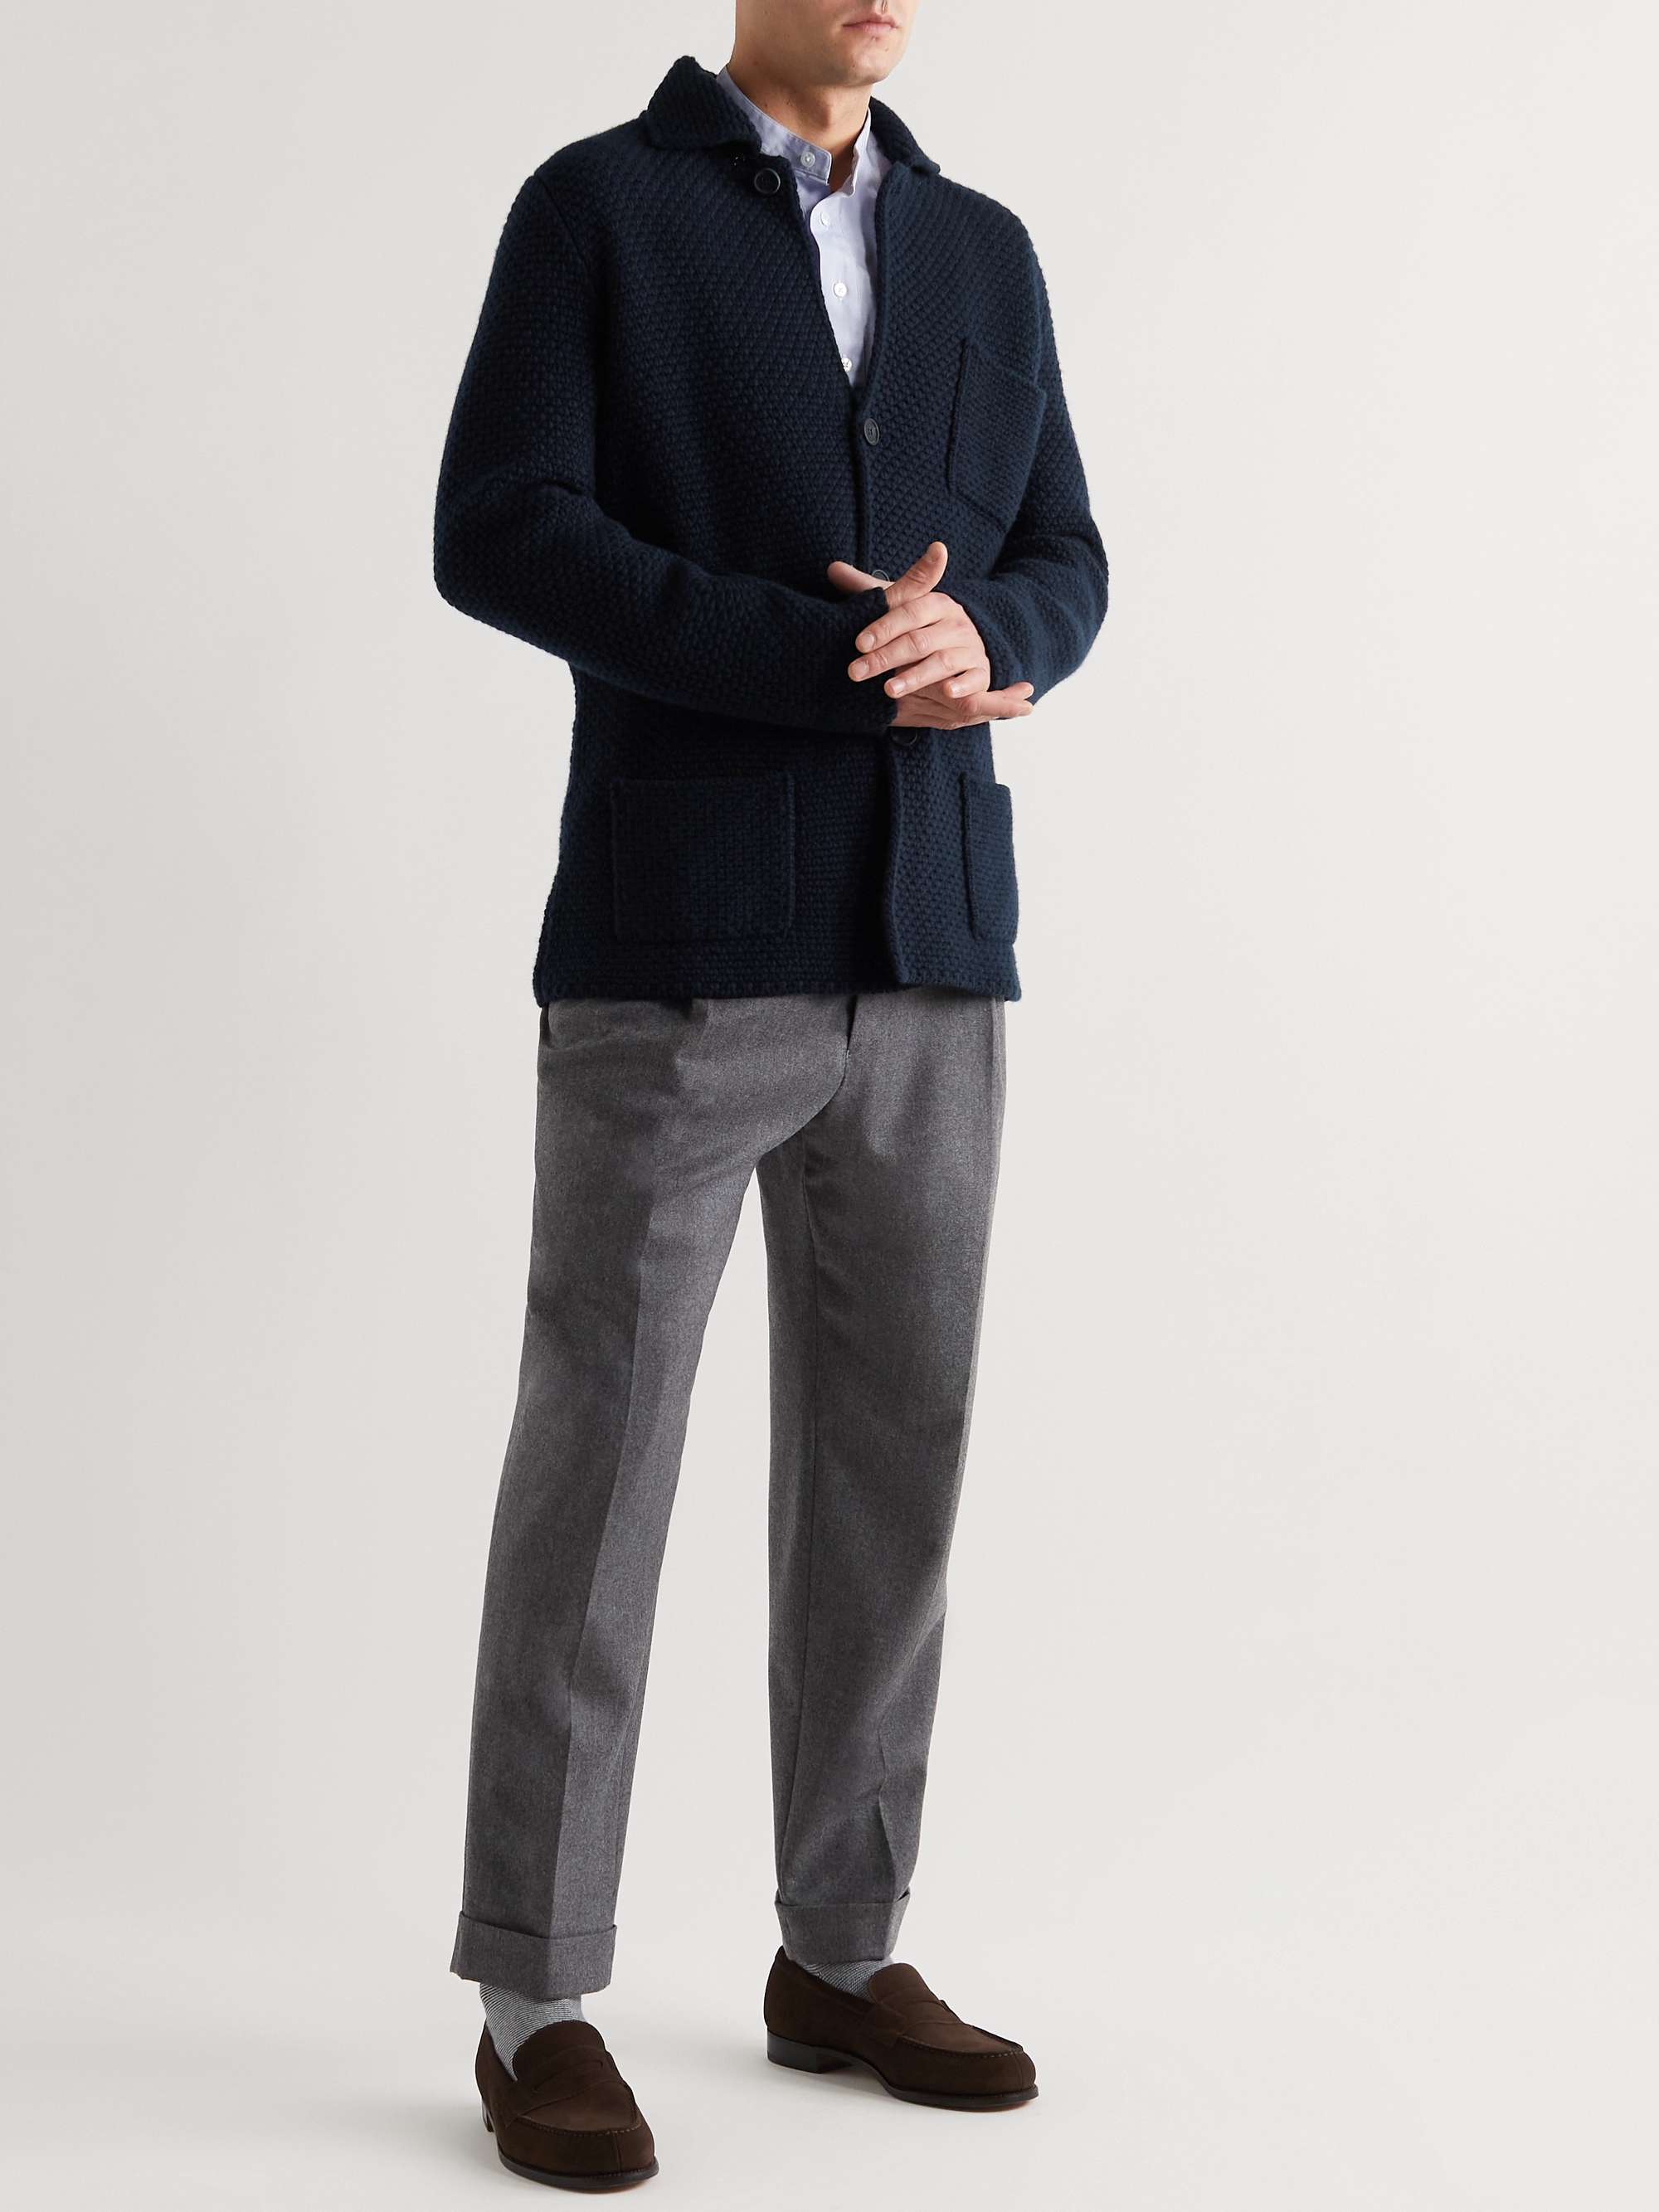 ANDERSON & SHEPPARD Slim-Fit Textured Wool and Cashmere-Blend Cardigan